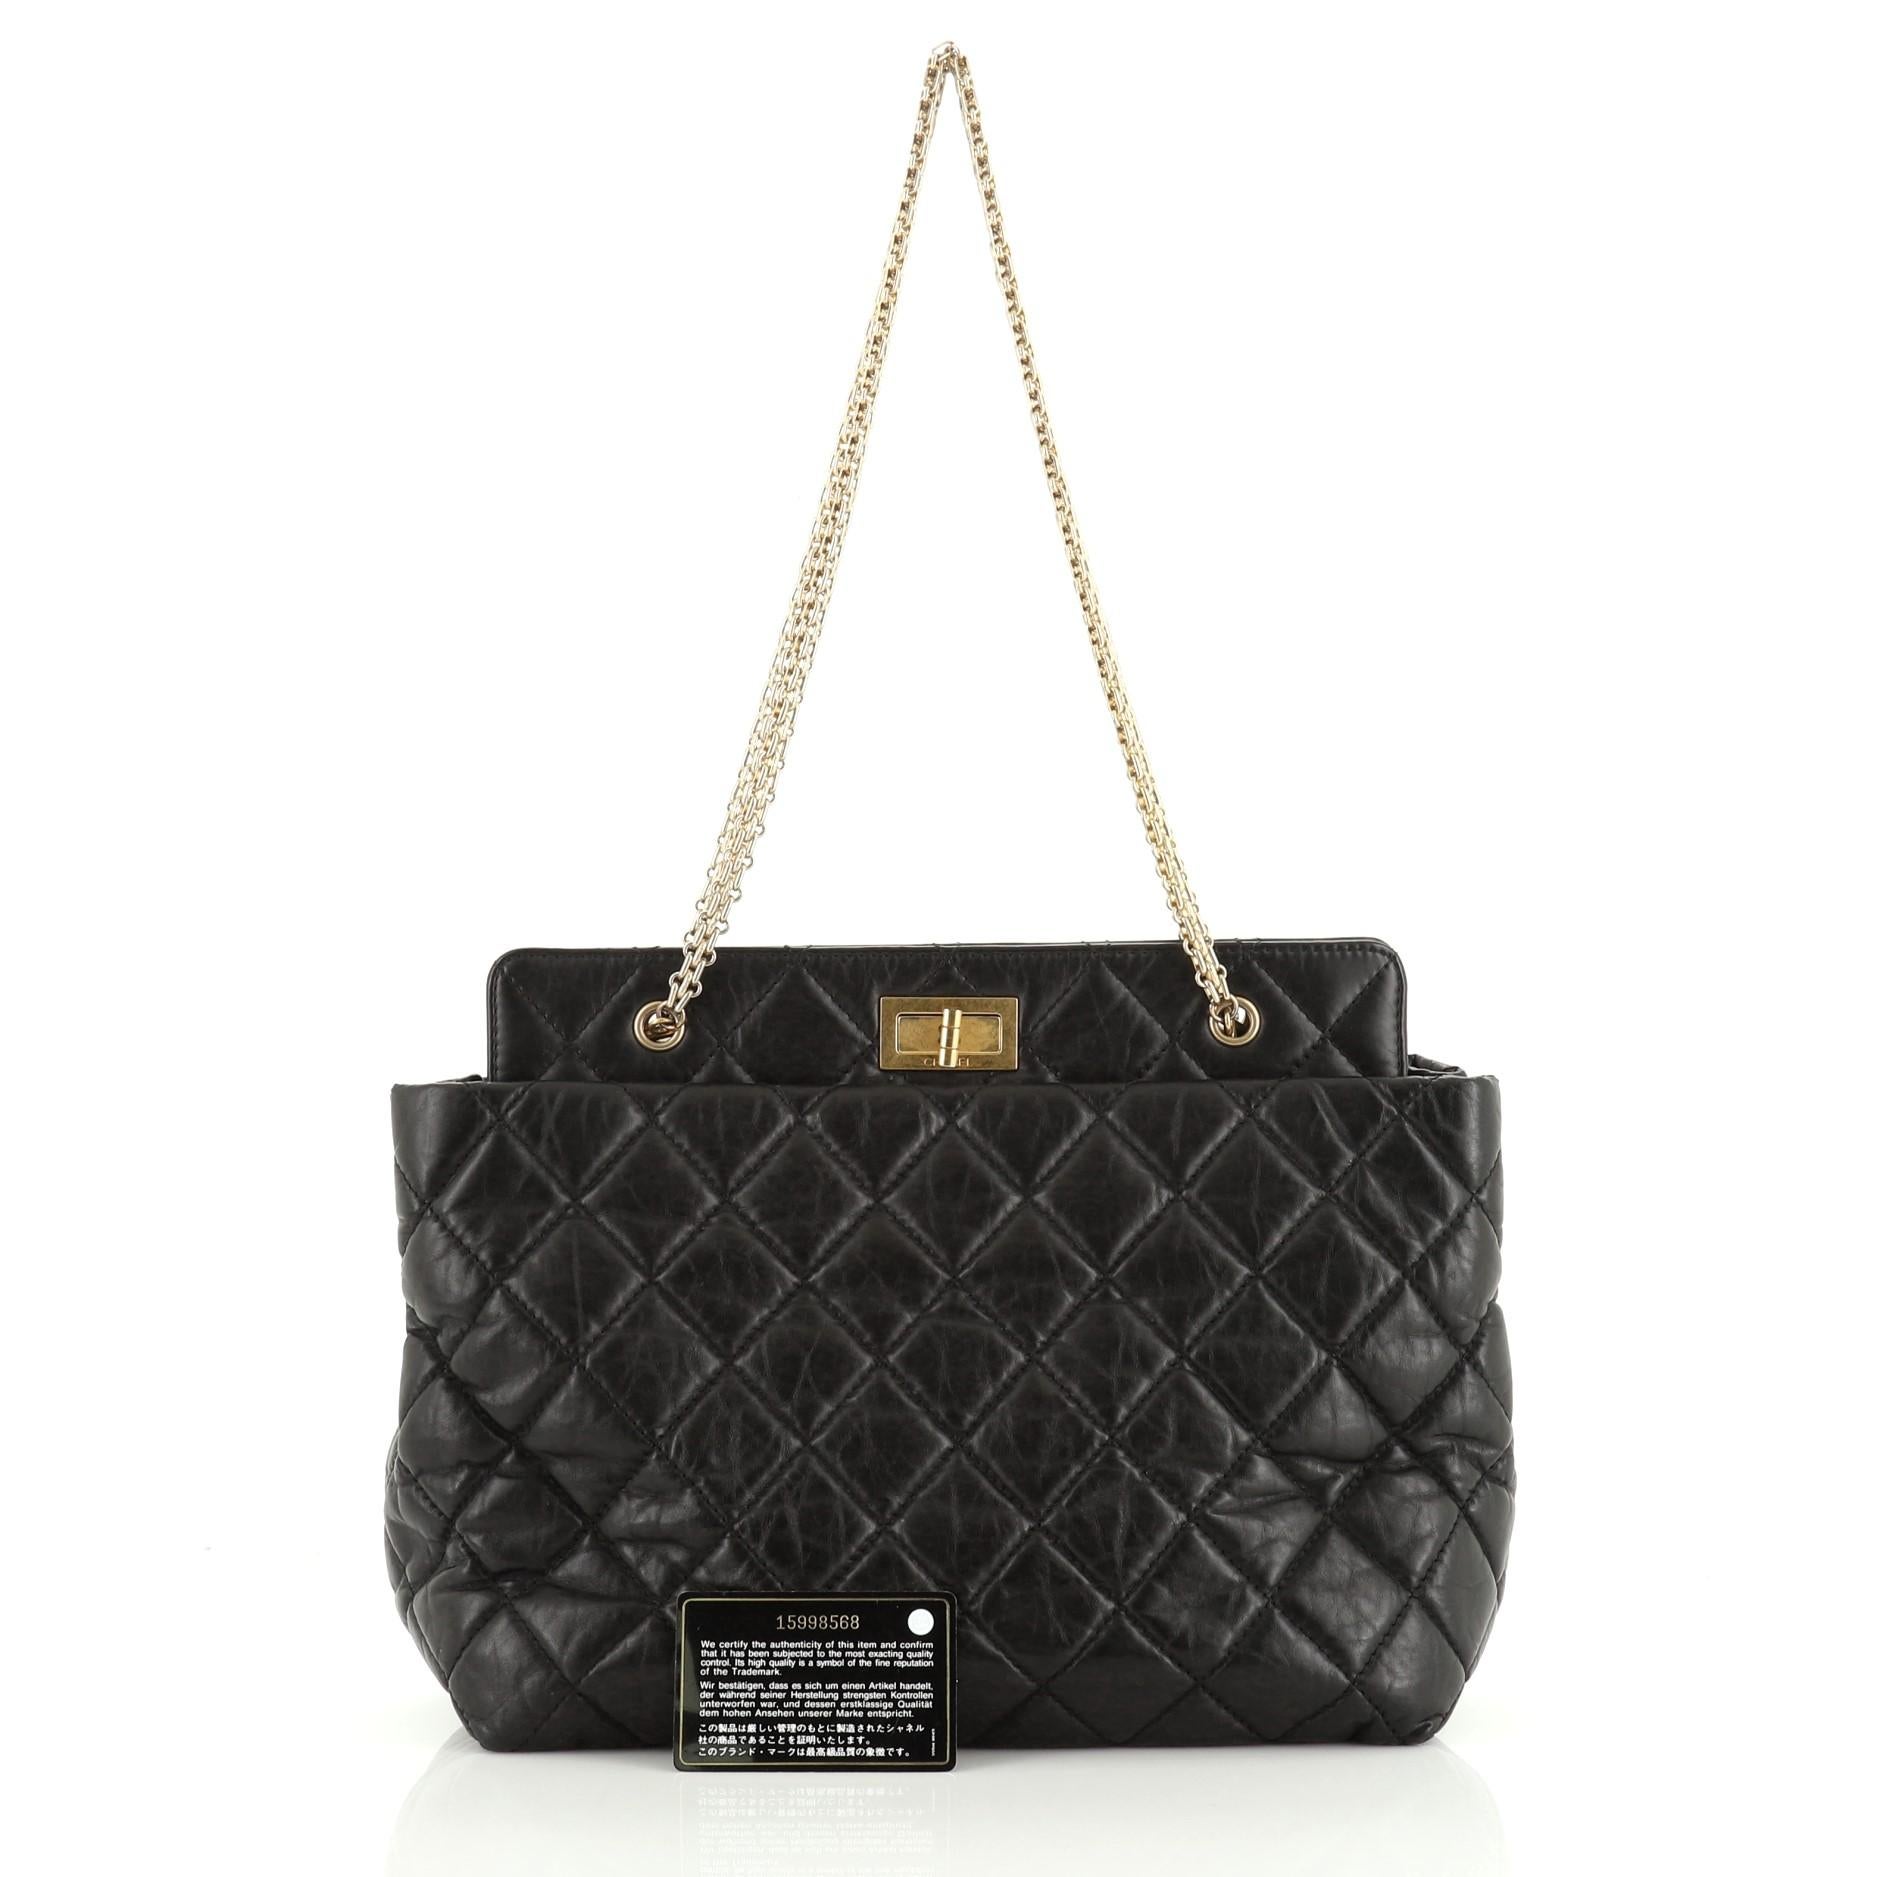 This Chanel Reissue Tote Quilted Aged Calfskin Medium, crafted in black quilted aged calfskin leather, features chain link straps and gold-tone hardware. Its mademoiselle turn-lock closure opens to a black fabric interior with middle zip compartment